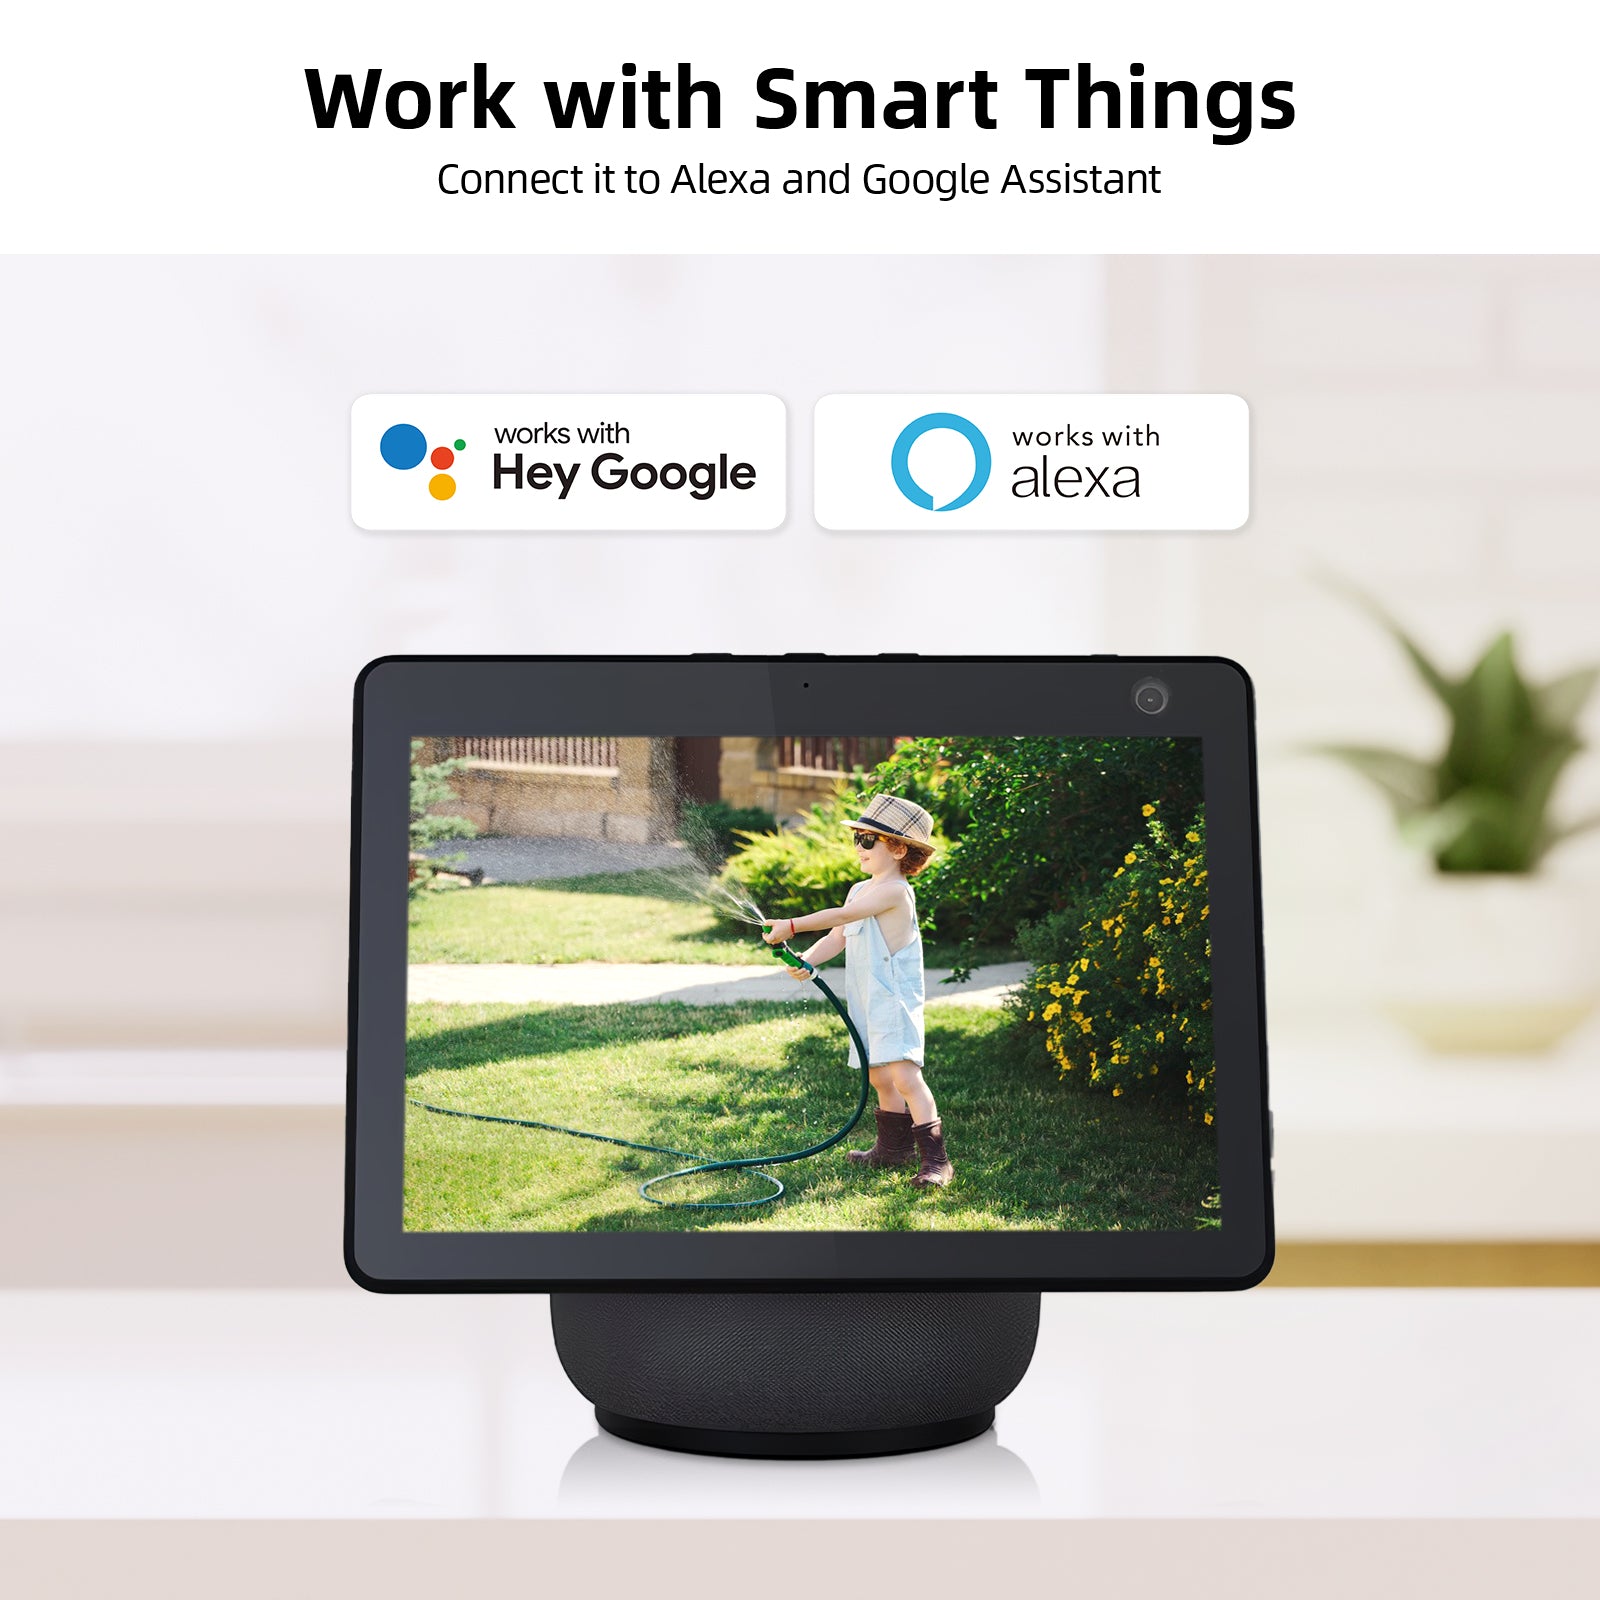 Work with Smart Things, connect it to Alexa and Google Assistant